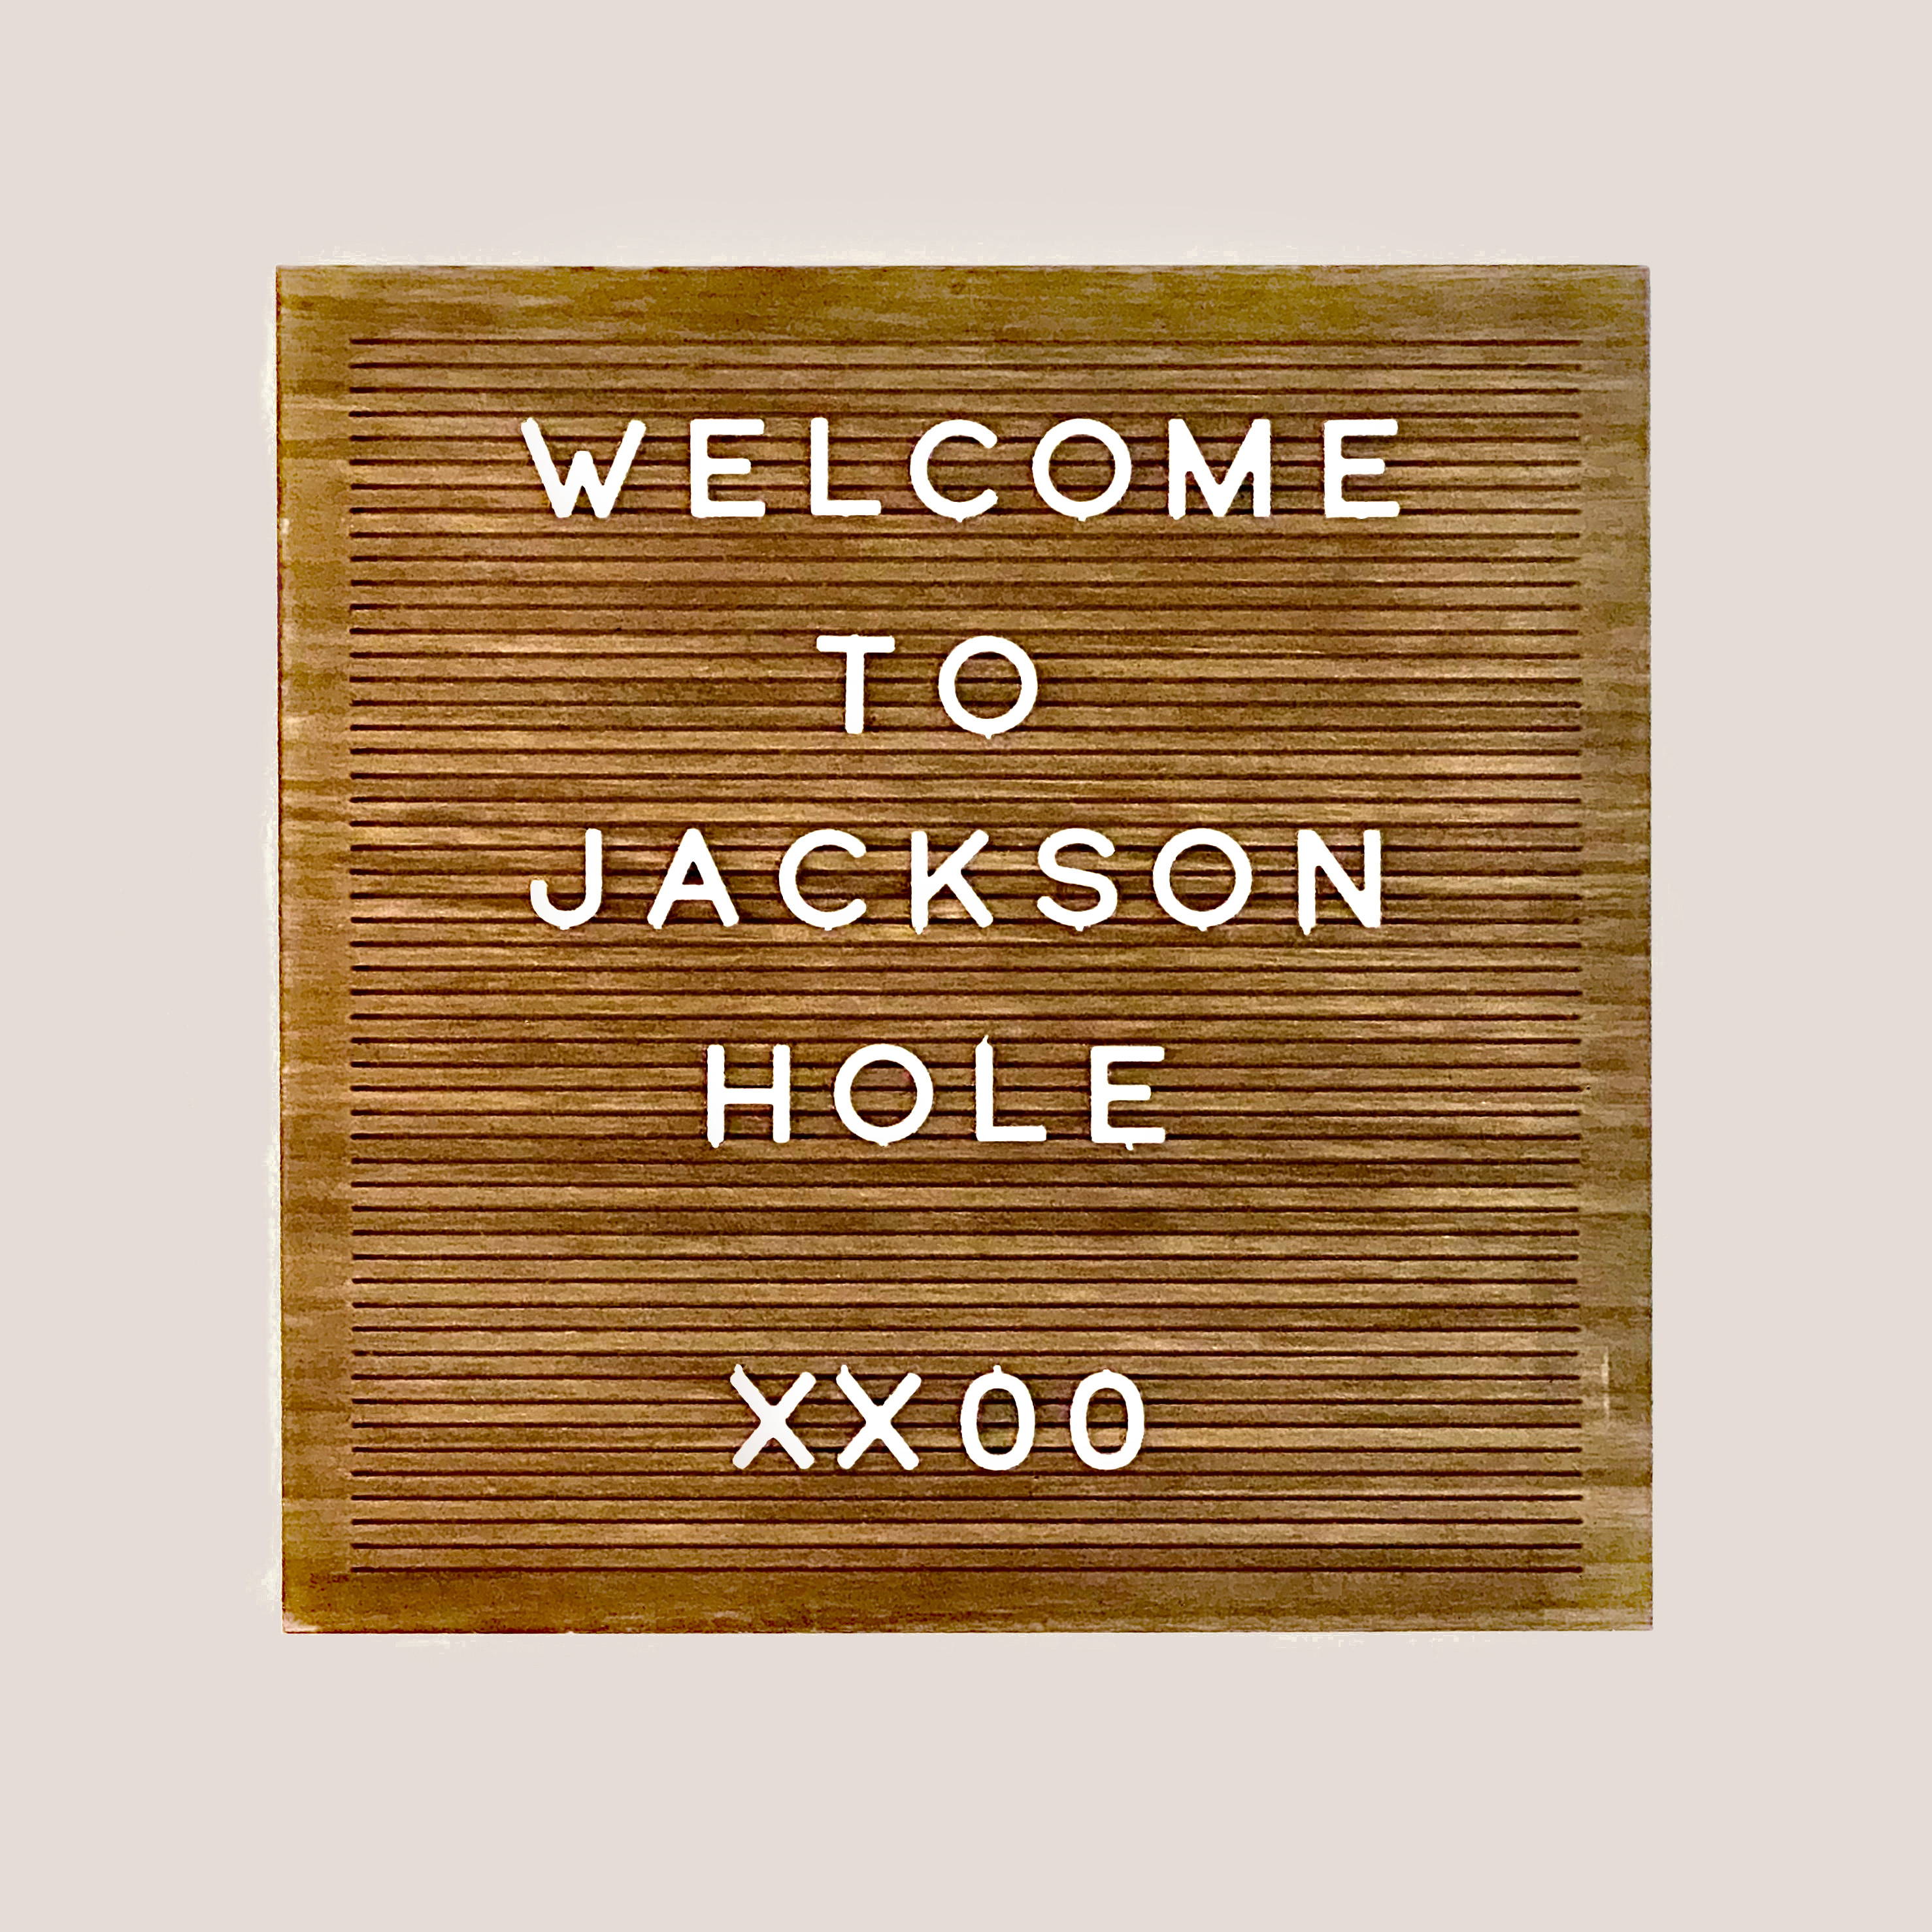 A sign with message "Welcome to Jackson Hole" 